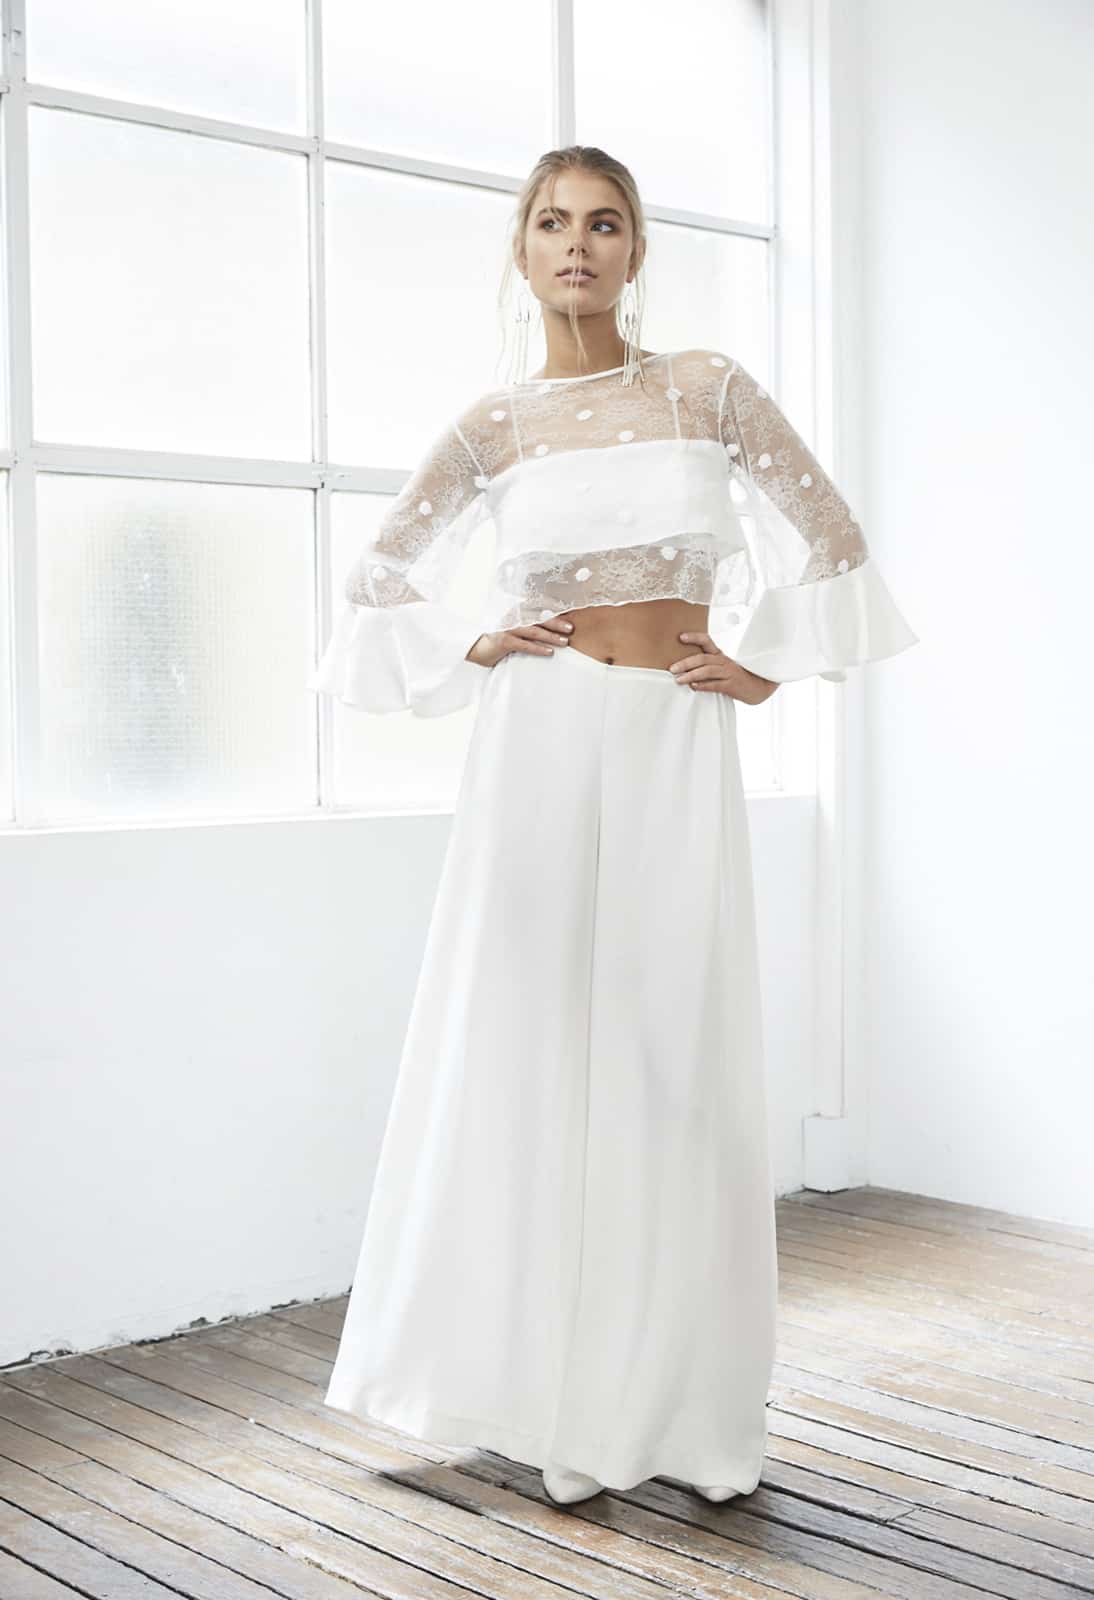 Top wedding dresses under $1000 - bridal separates by Grace Loves Lace